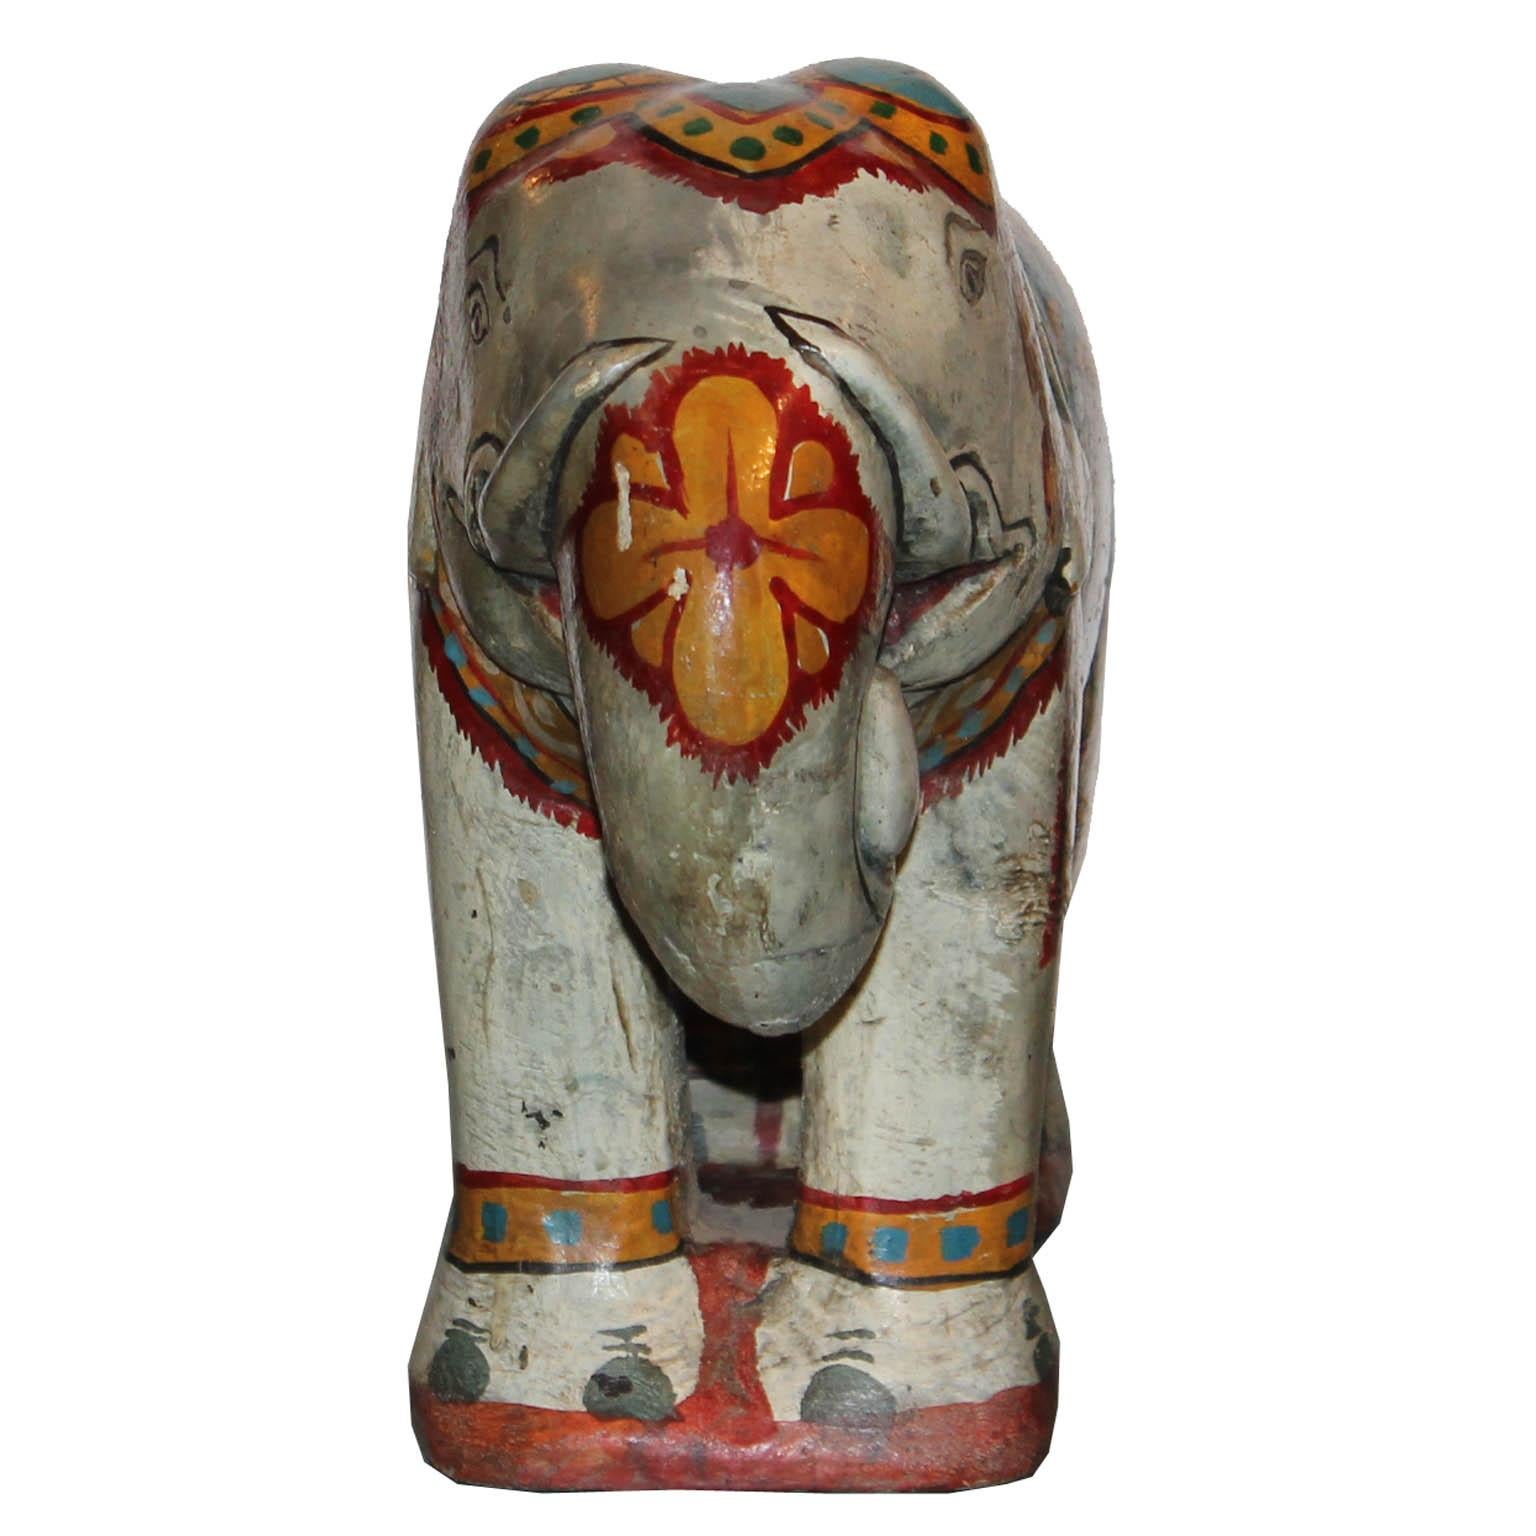 Hand painted wood elephant with regal ceremonial clothes would be a colorful accessory for a bookshelf or coffee table.